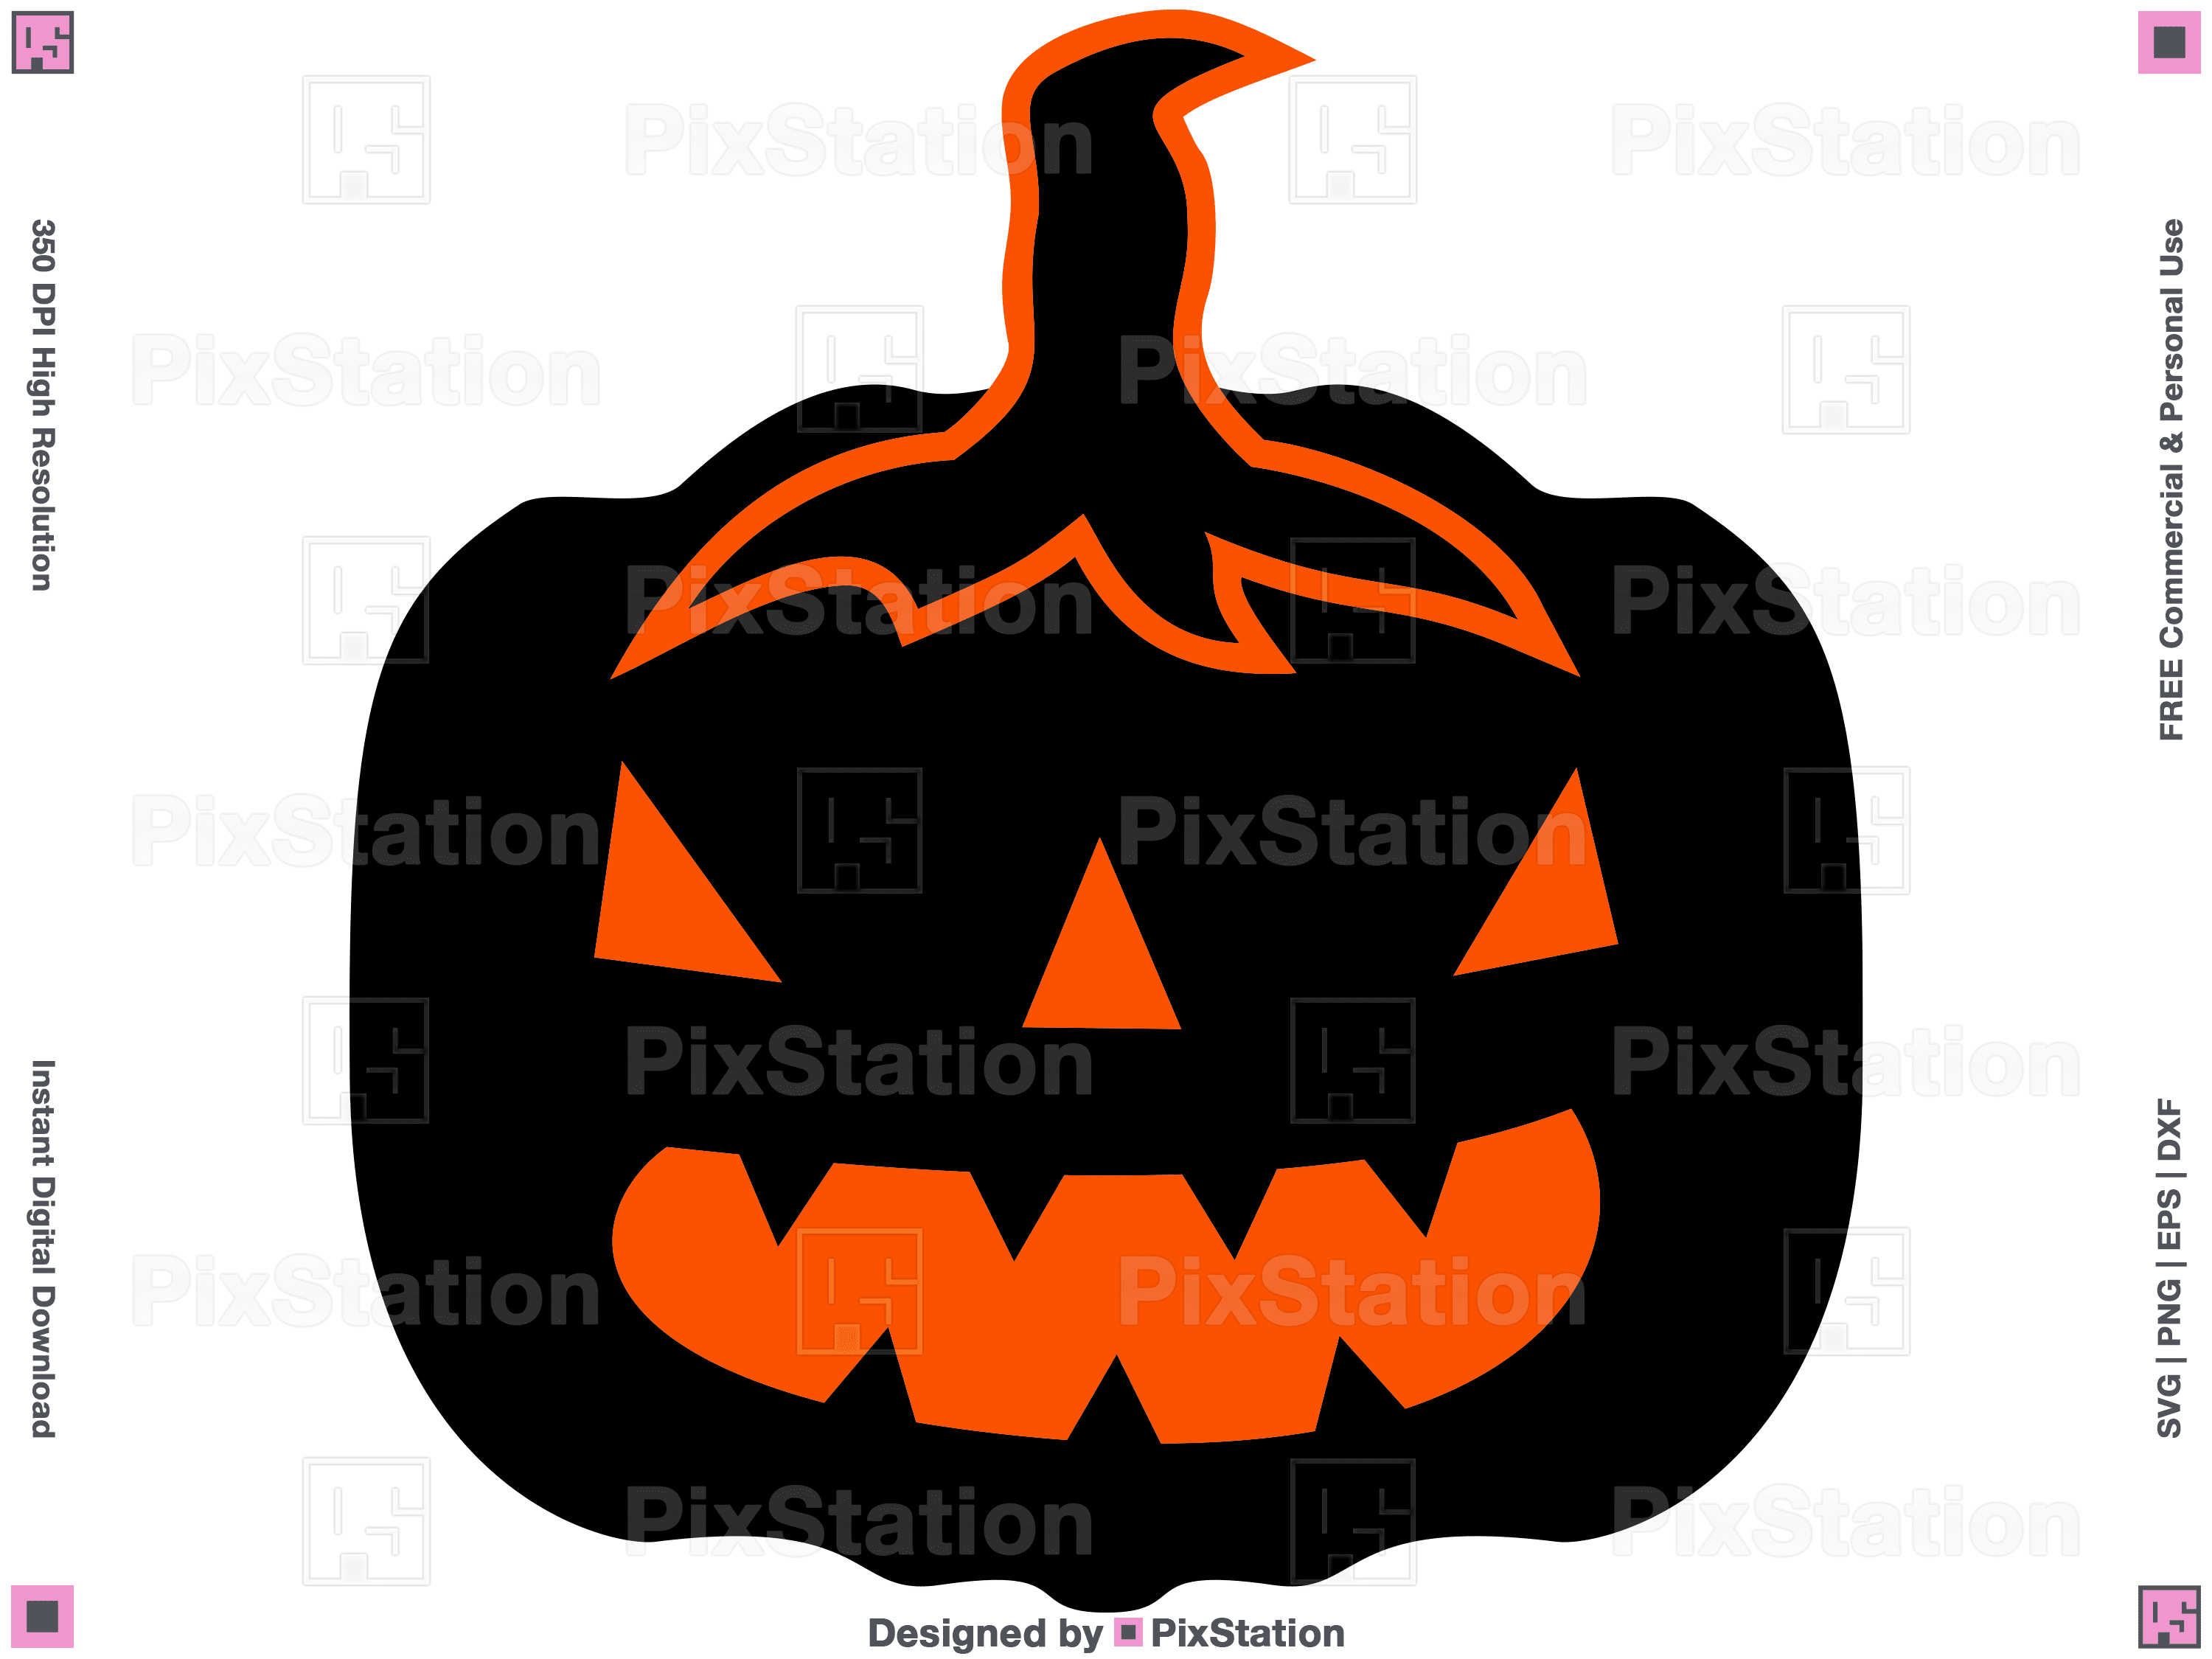 Halloween face Svg, Scary Face Png, Pumpkin face Eps, Dxf